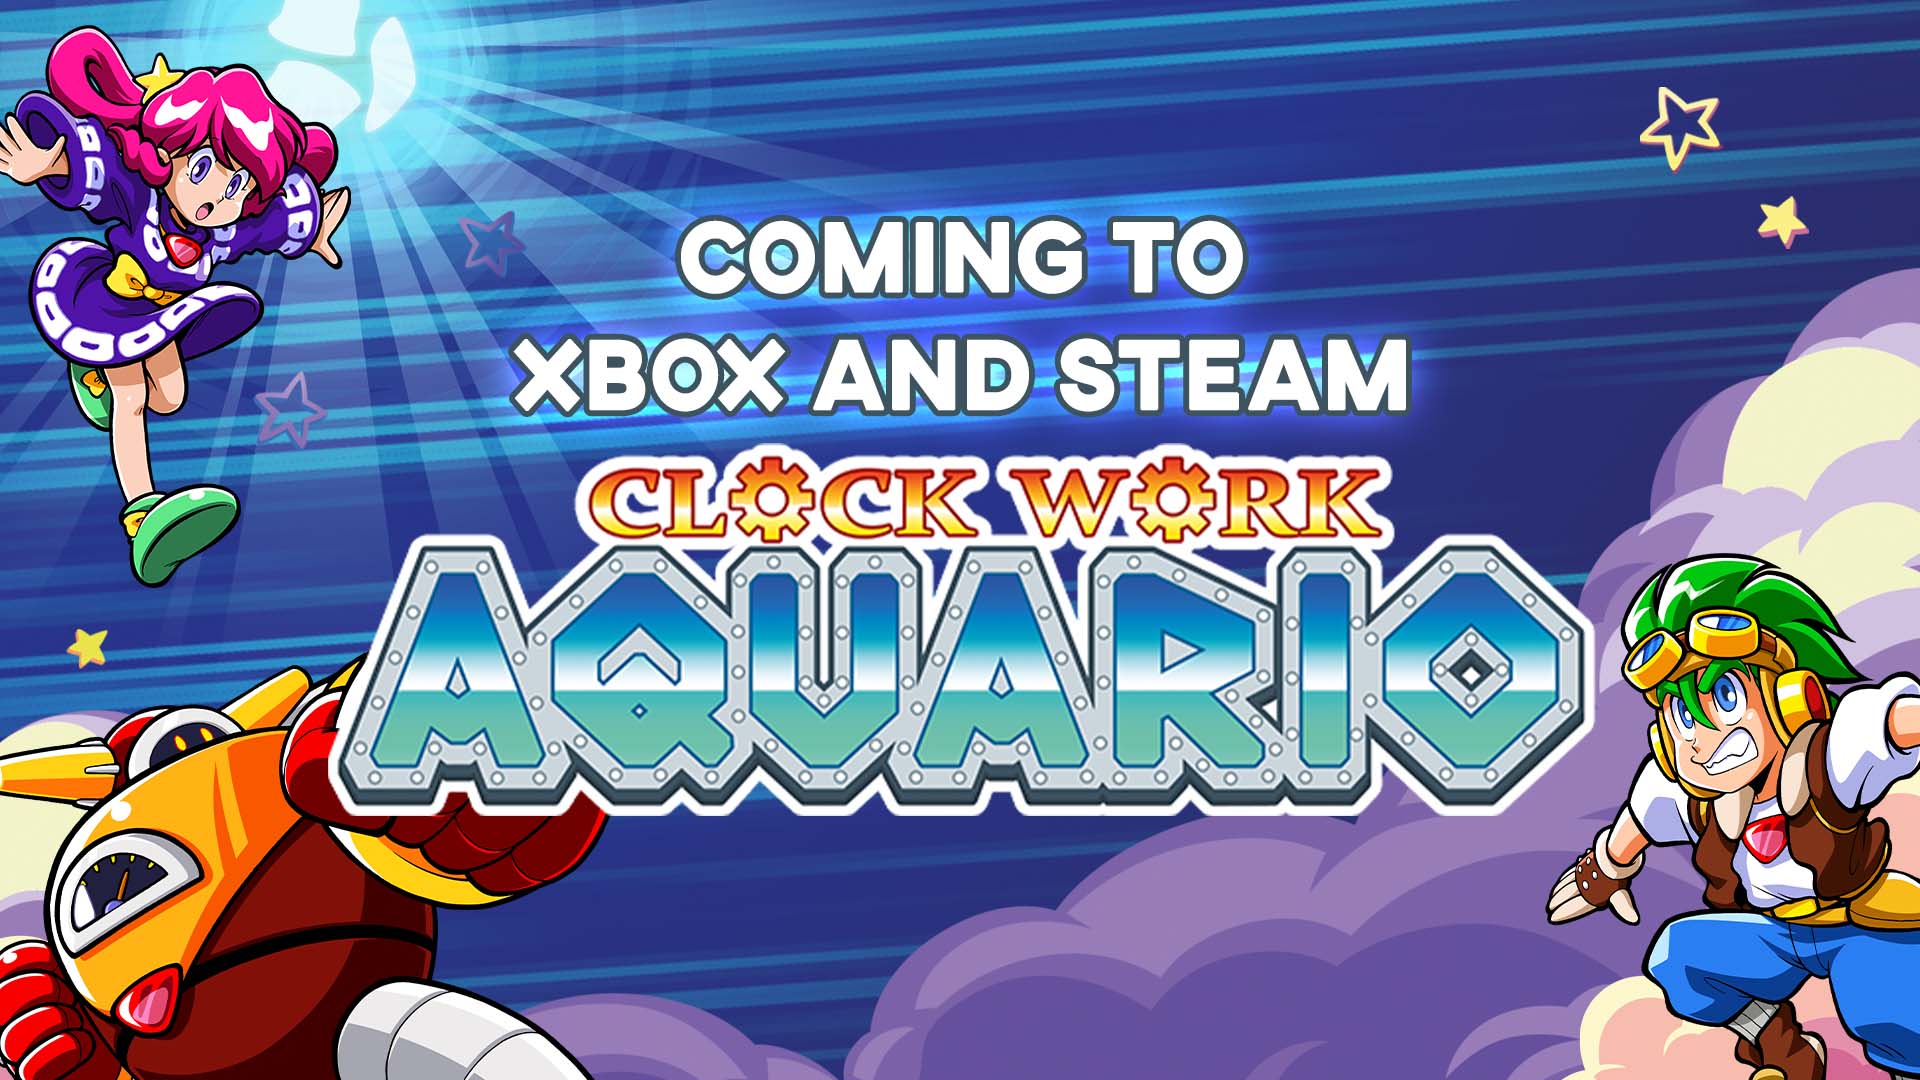 Clockwork Aquario is Coming to PC and Xbox One